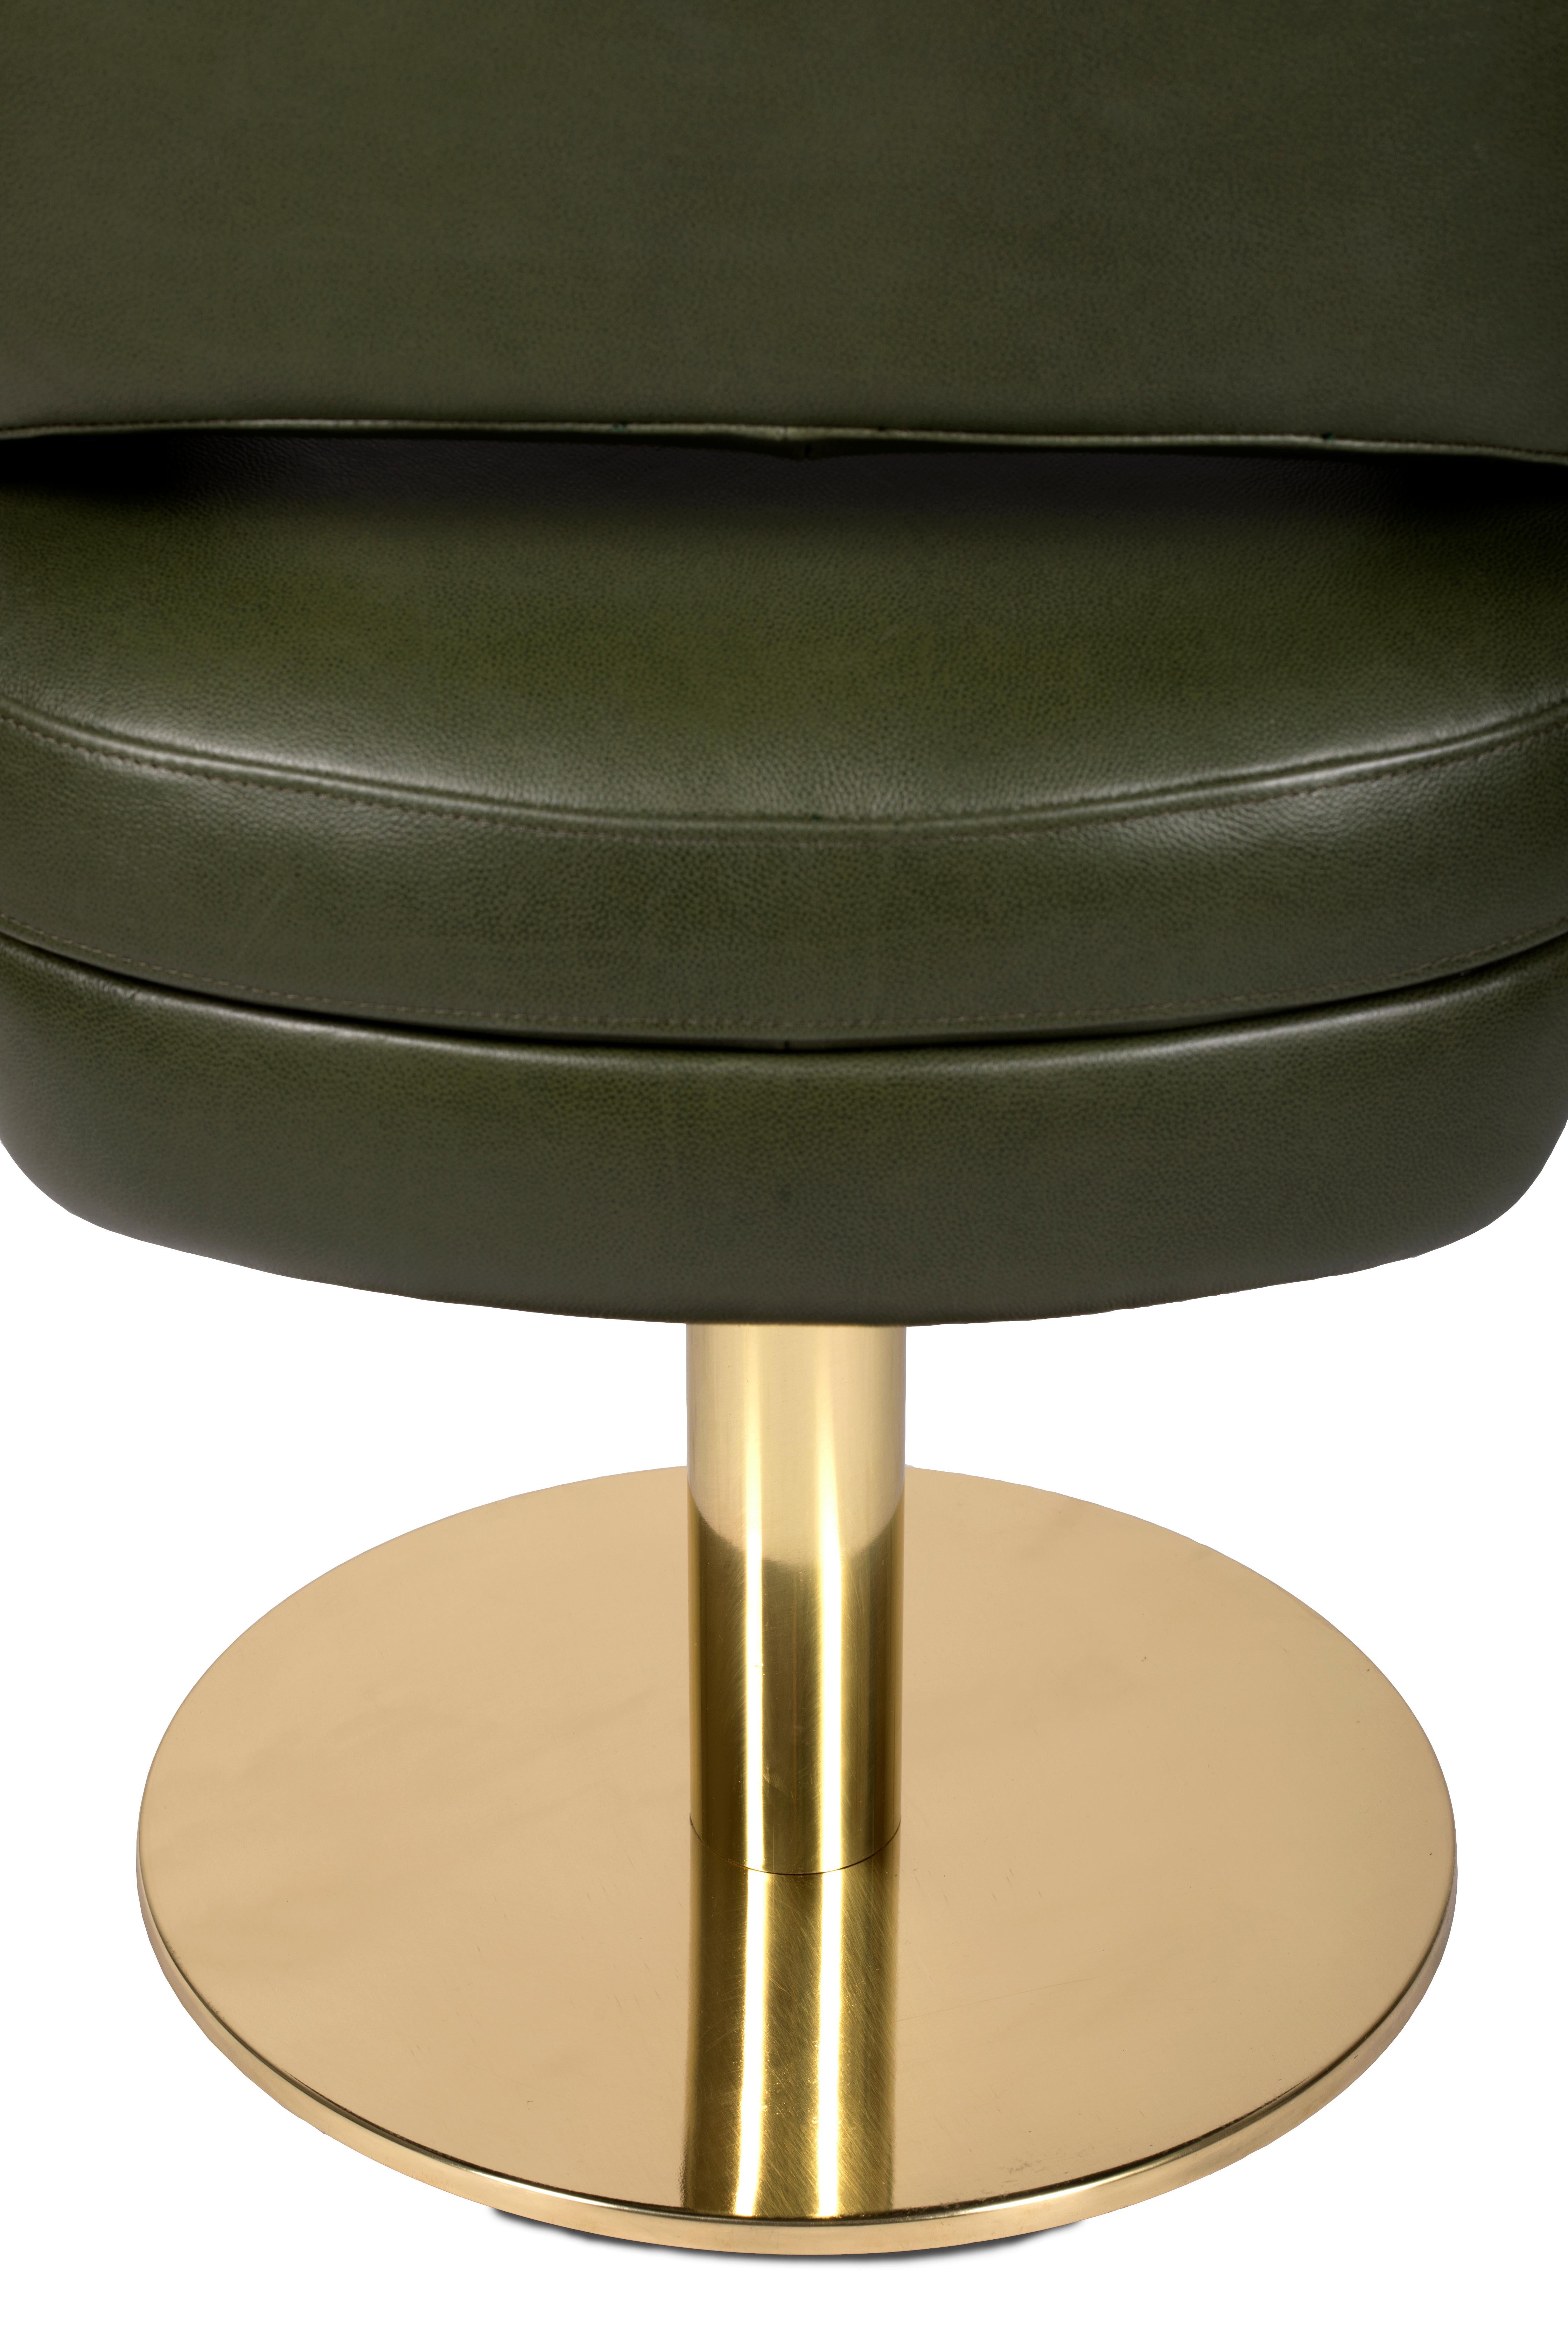 Mid-Century Modern Russel Brass Base Dining Chair by Essential Home

Mid-Century Modern Russel Brass Base Dining Chair has a round polished brass base and the timeless seductive velvet layered over a comfy foam frame. Extremely sculptural, it